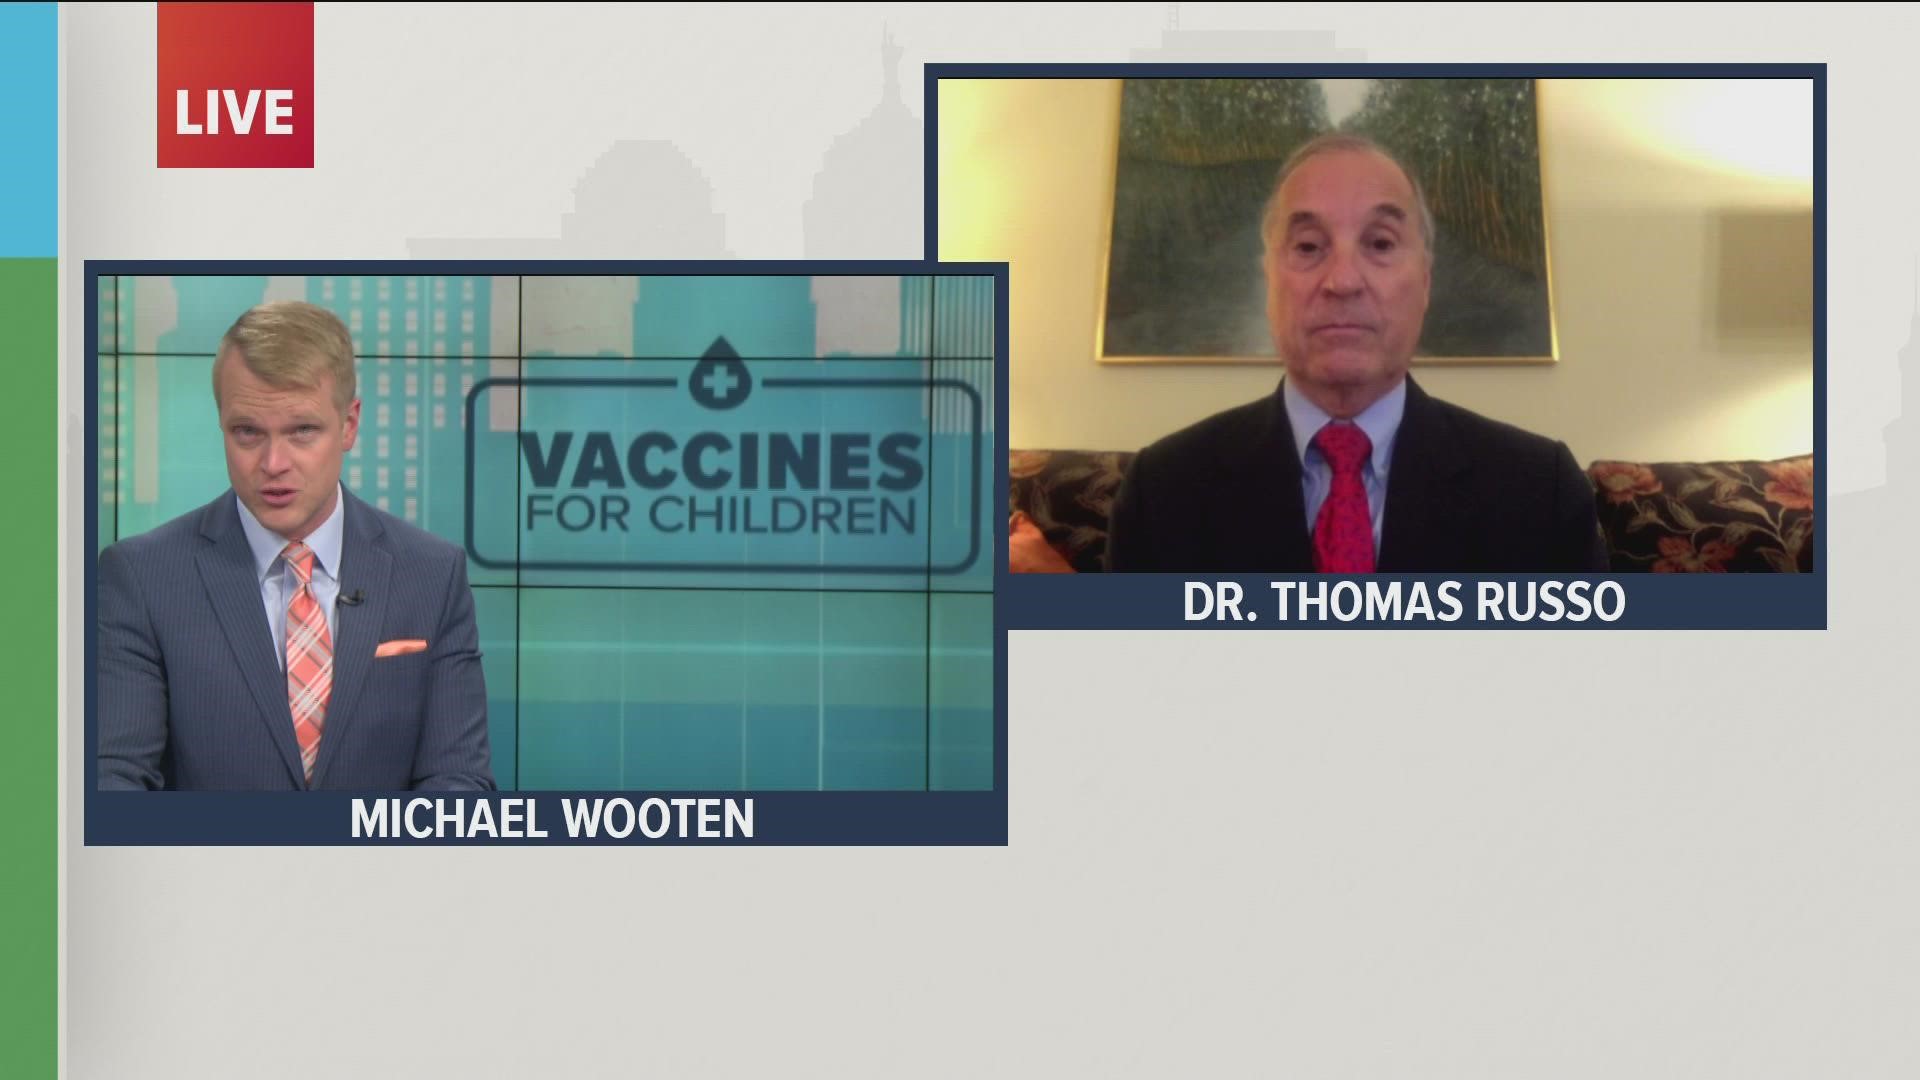 Dr. Thomas Russo the chief of infectious diseases at UB discussed what vaccines are required for kids to attend school.